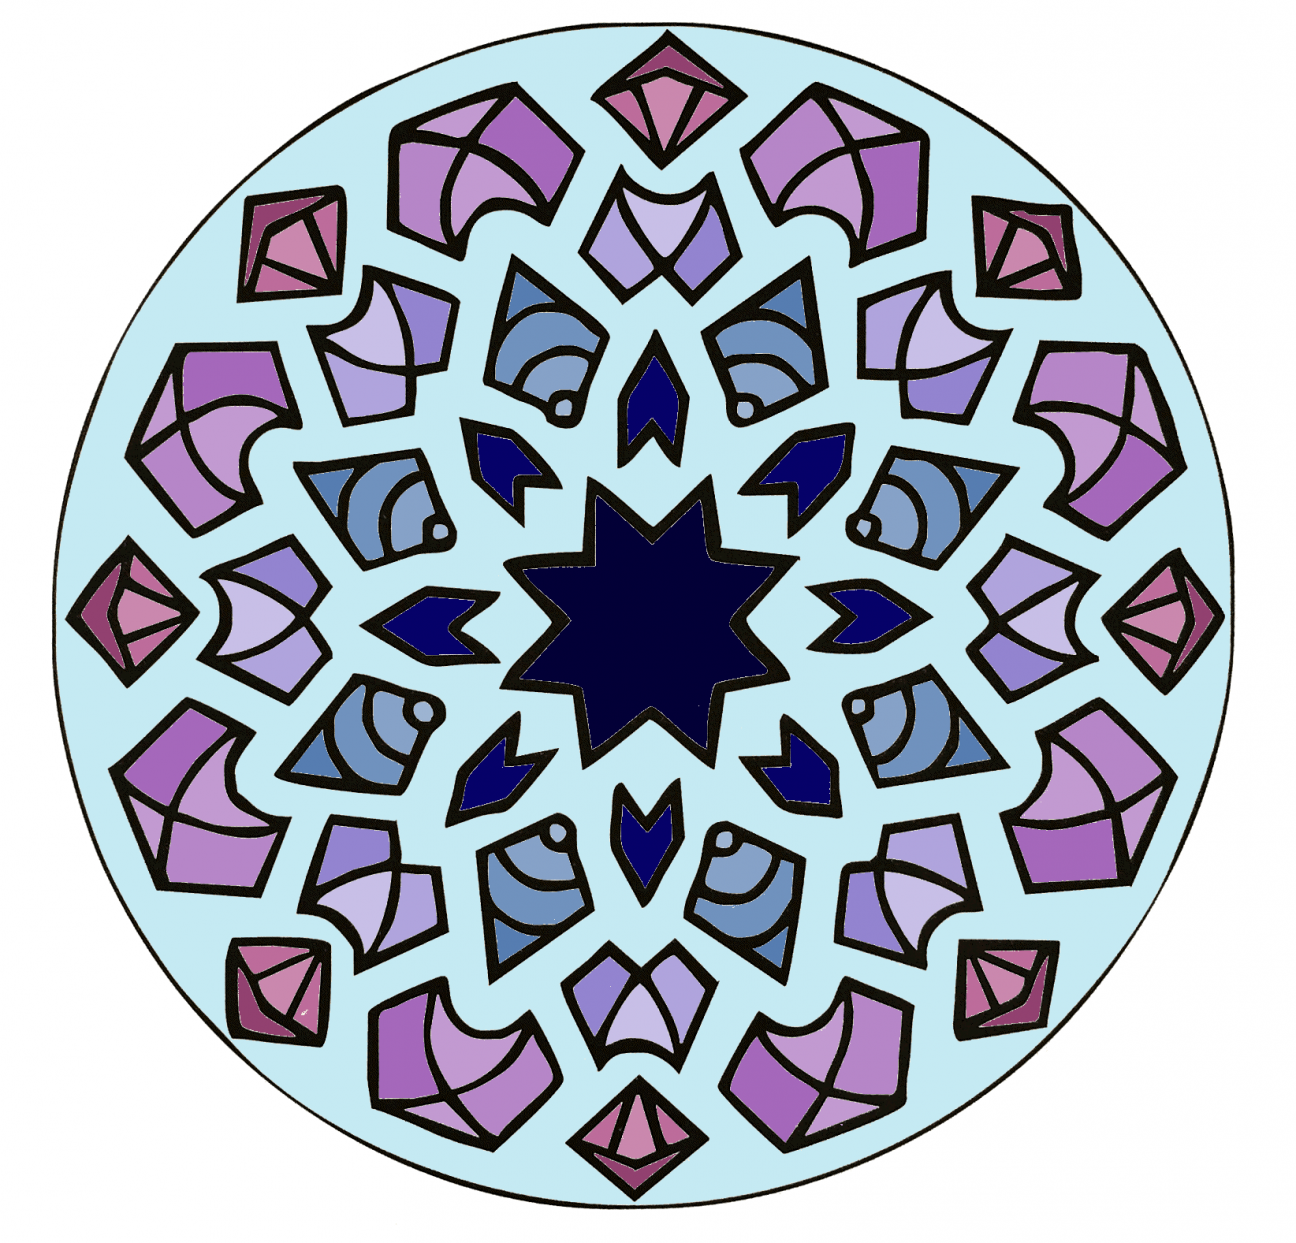 A circular mandala colored in shades of blue and purple.